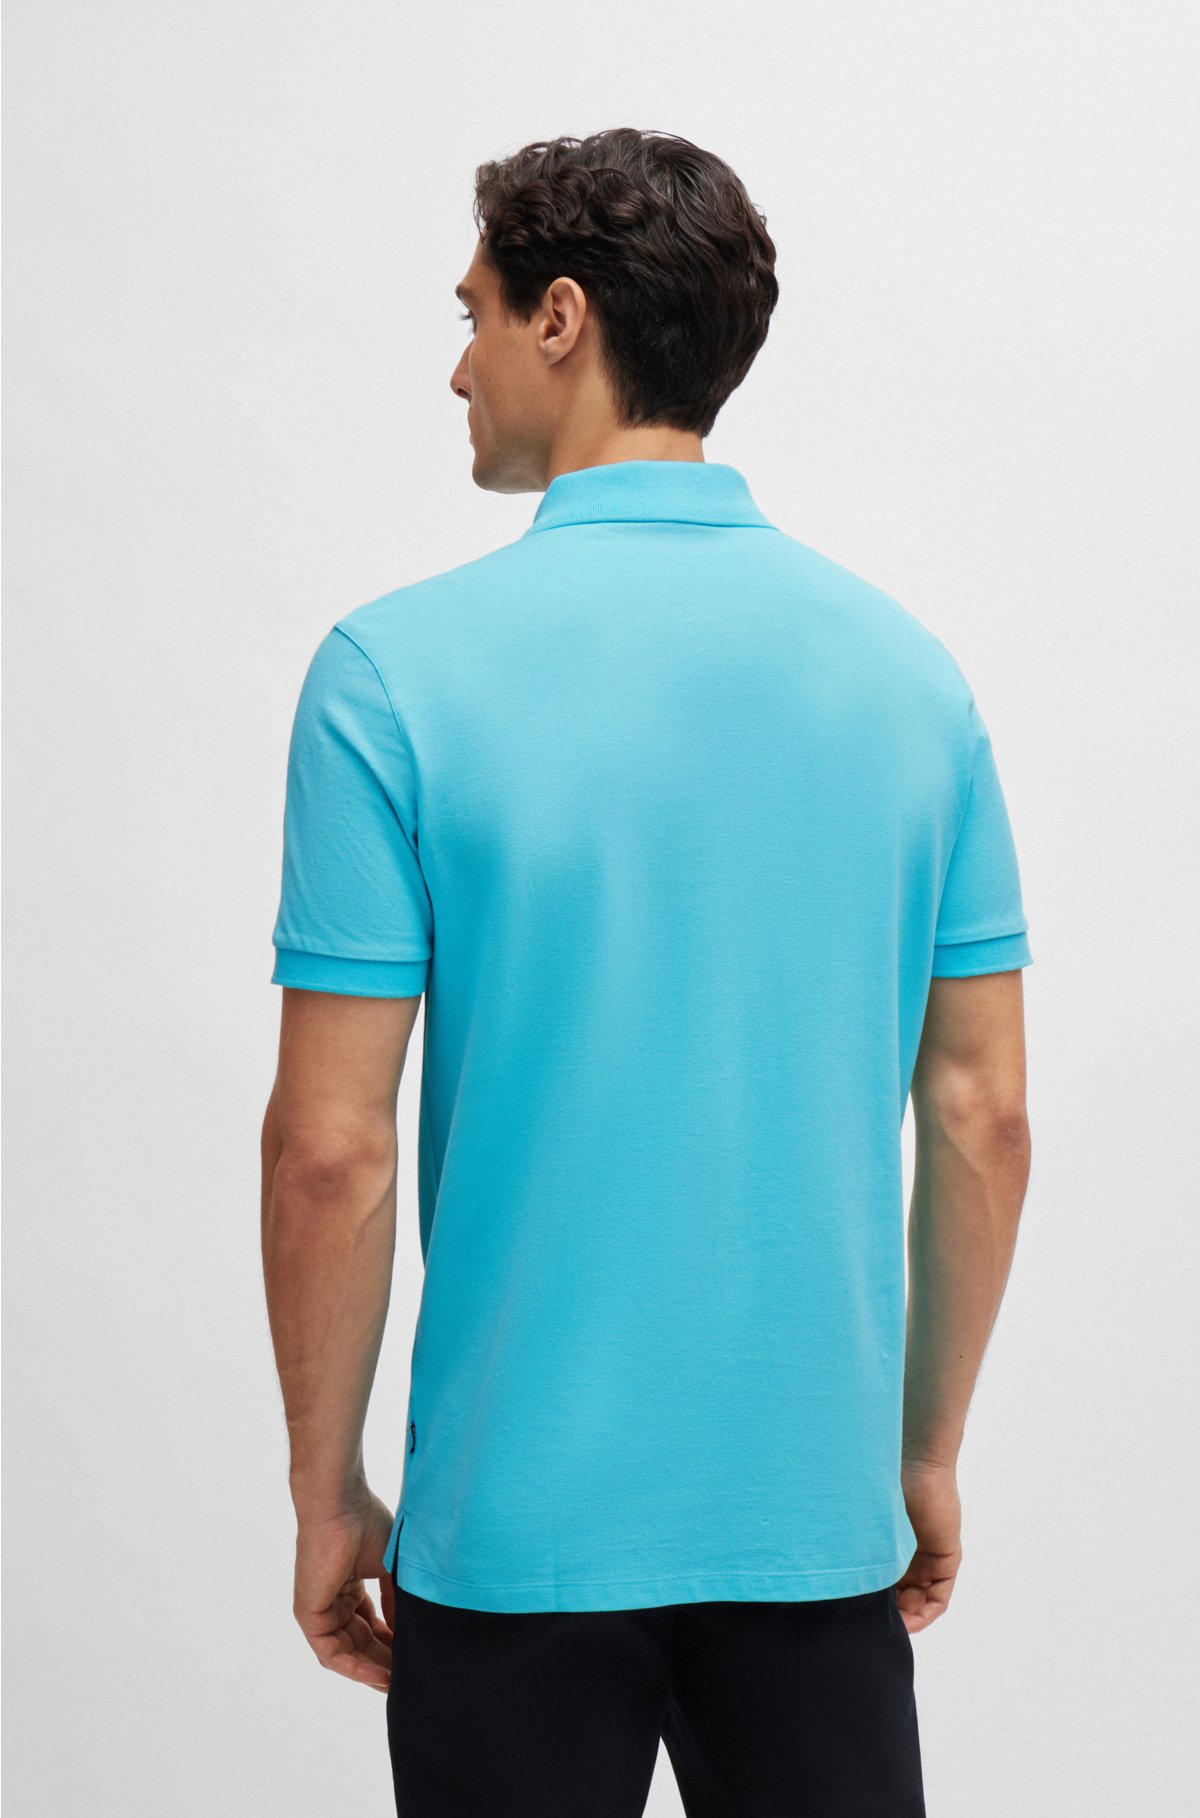 Cotton polo shirt with embroidered logo, Turquoise